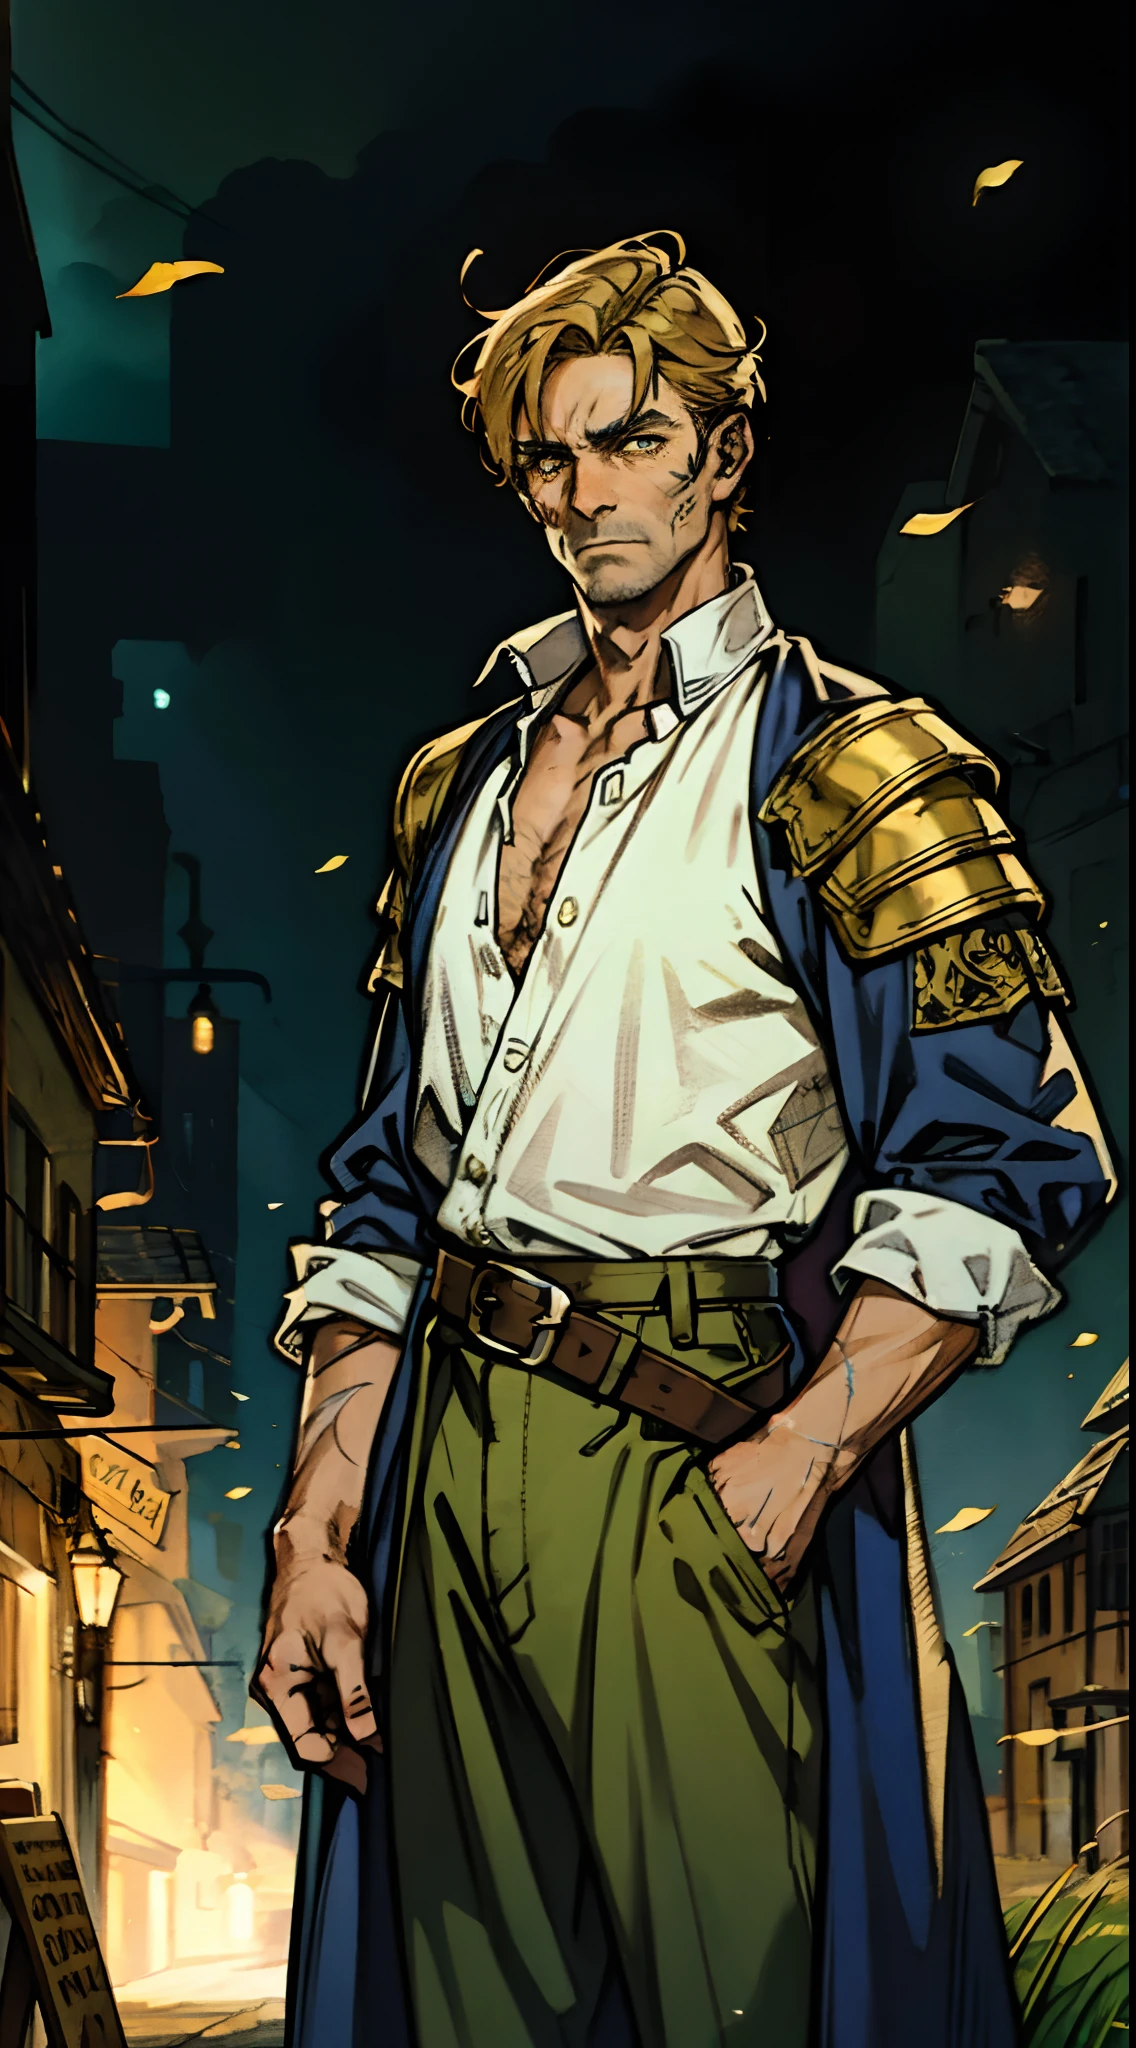 A middle-aged man with short golden hair, thick hair, a large cross scar on his face, has gentle eyes, a calm expression, a fantasy-style coat with leaf-shaped chest armor, the color scheme is mainly grass green, with earthy yellow as secondary colors, a belt around his waist, coarse cloth trousers, the background shows a medieval fantasy-style street with snowflakes falling, this character embodies a finely crafted fantasy-style soldier in anime style, characterized by an exquisite and mature manga illustration art style, high definition, best quality, highres, ultra-detailed, ultra-fine painting, extremely delicate, professional, anatomically correct, symmetrical face, extremely detailed eyes and face, high quality eyes, creativity, RAW photo, UHD, 8k, Natural light, cinematic lighting, masterpiece:1.5